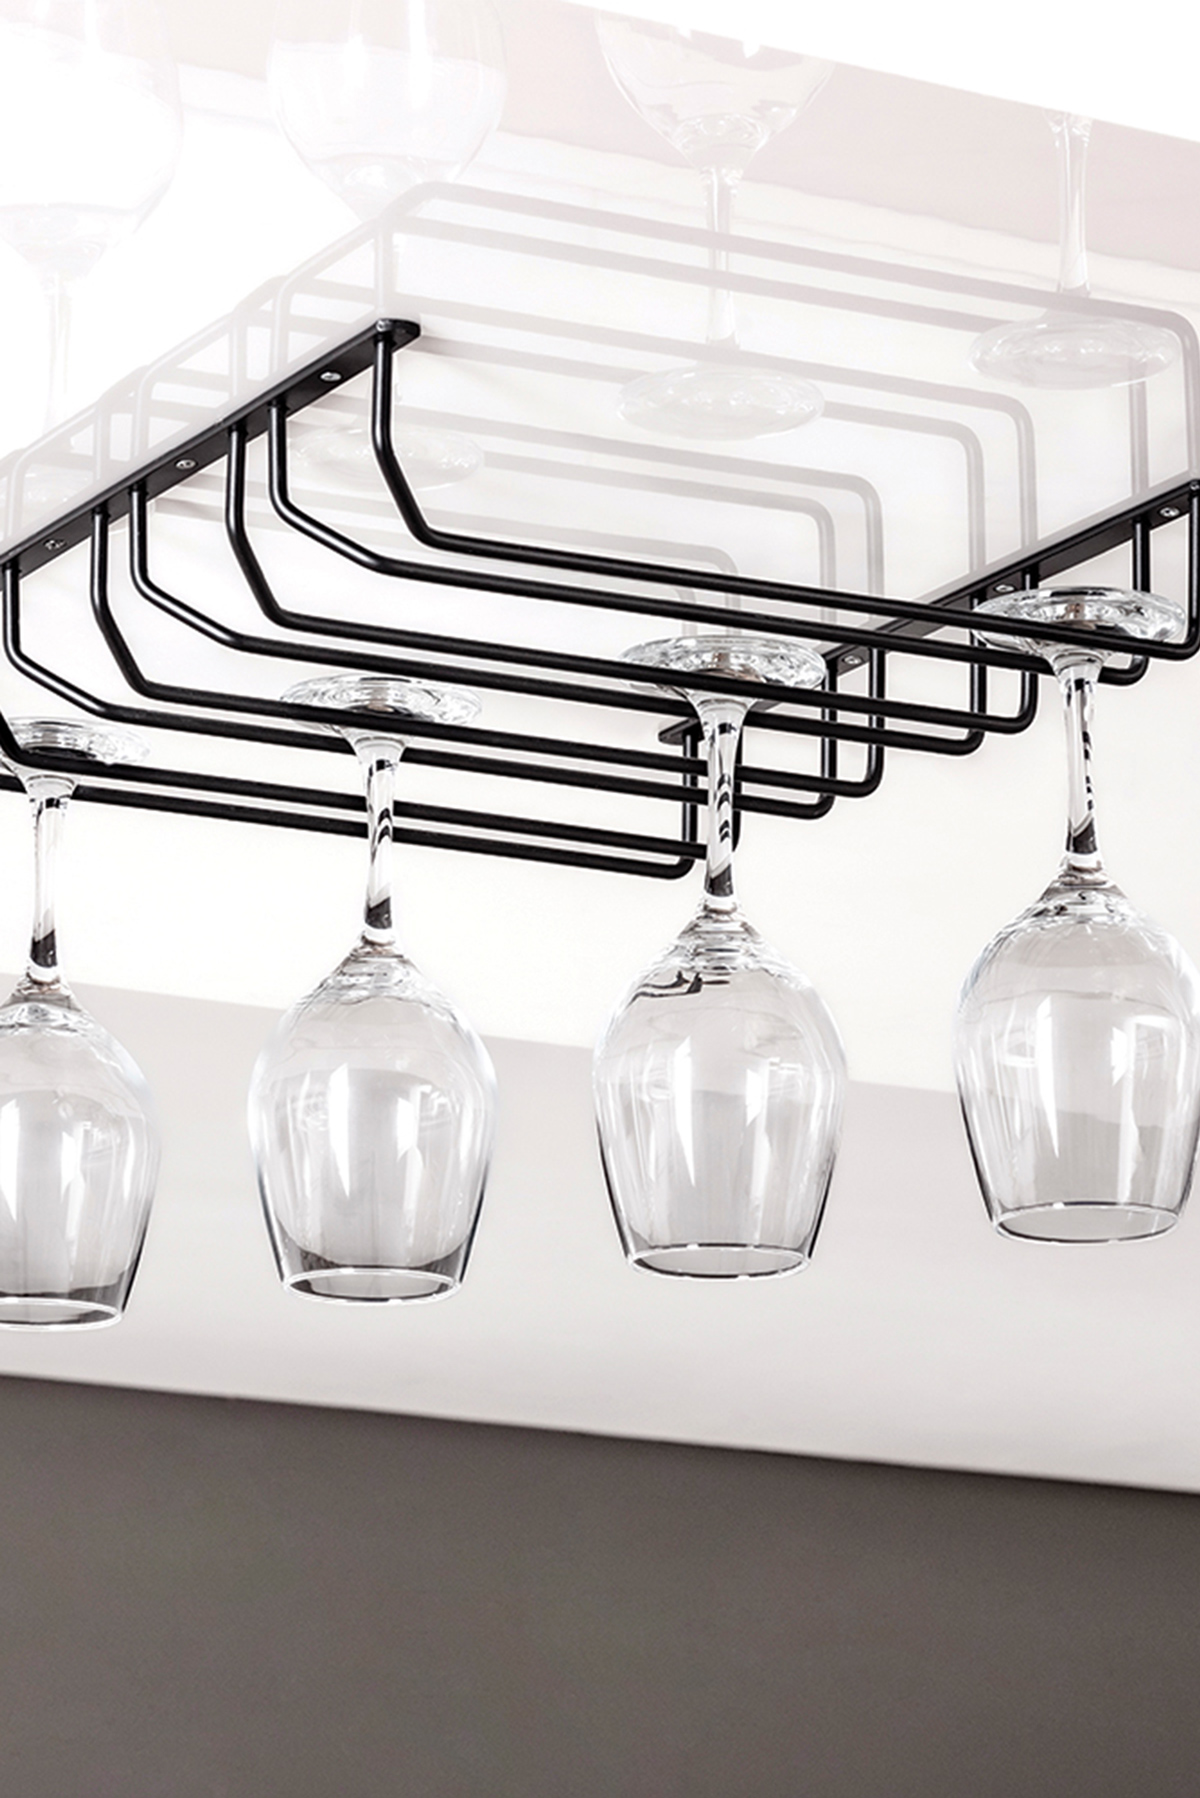 Glass Rack With 1-2-4 Division